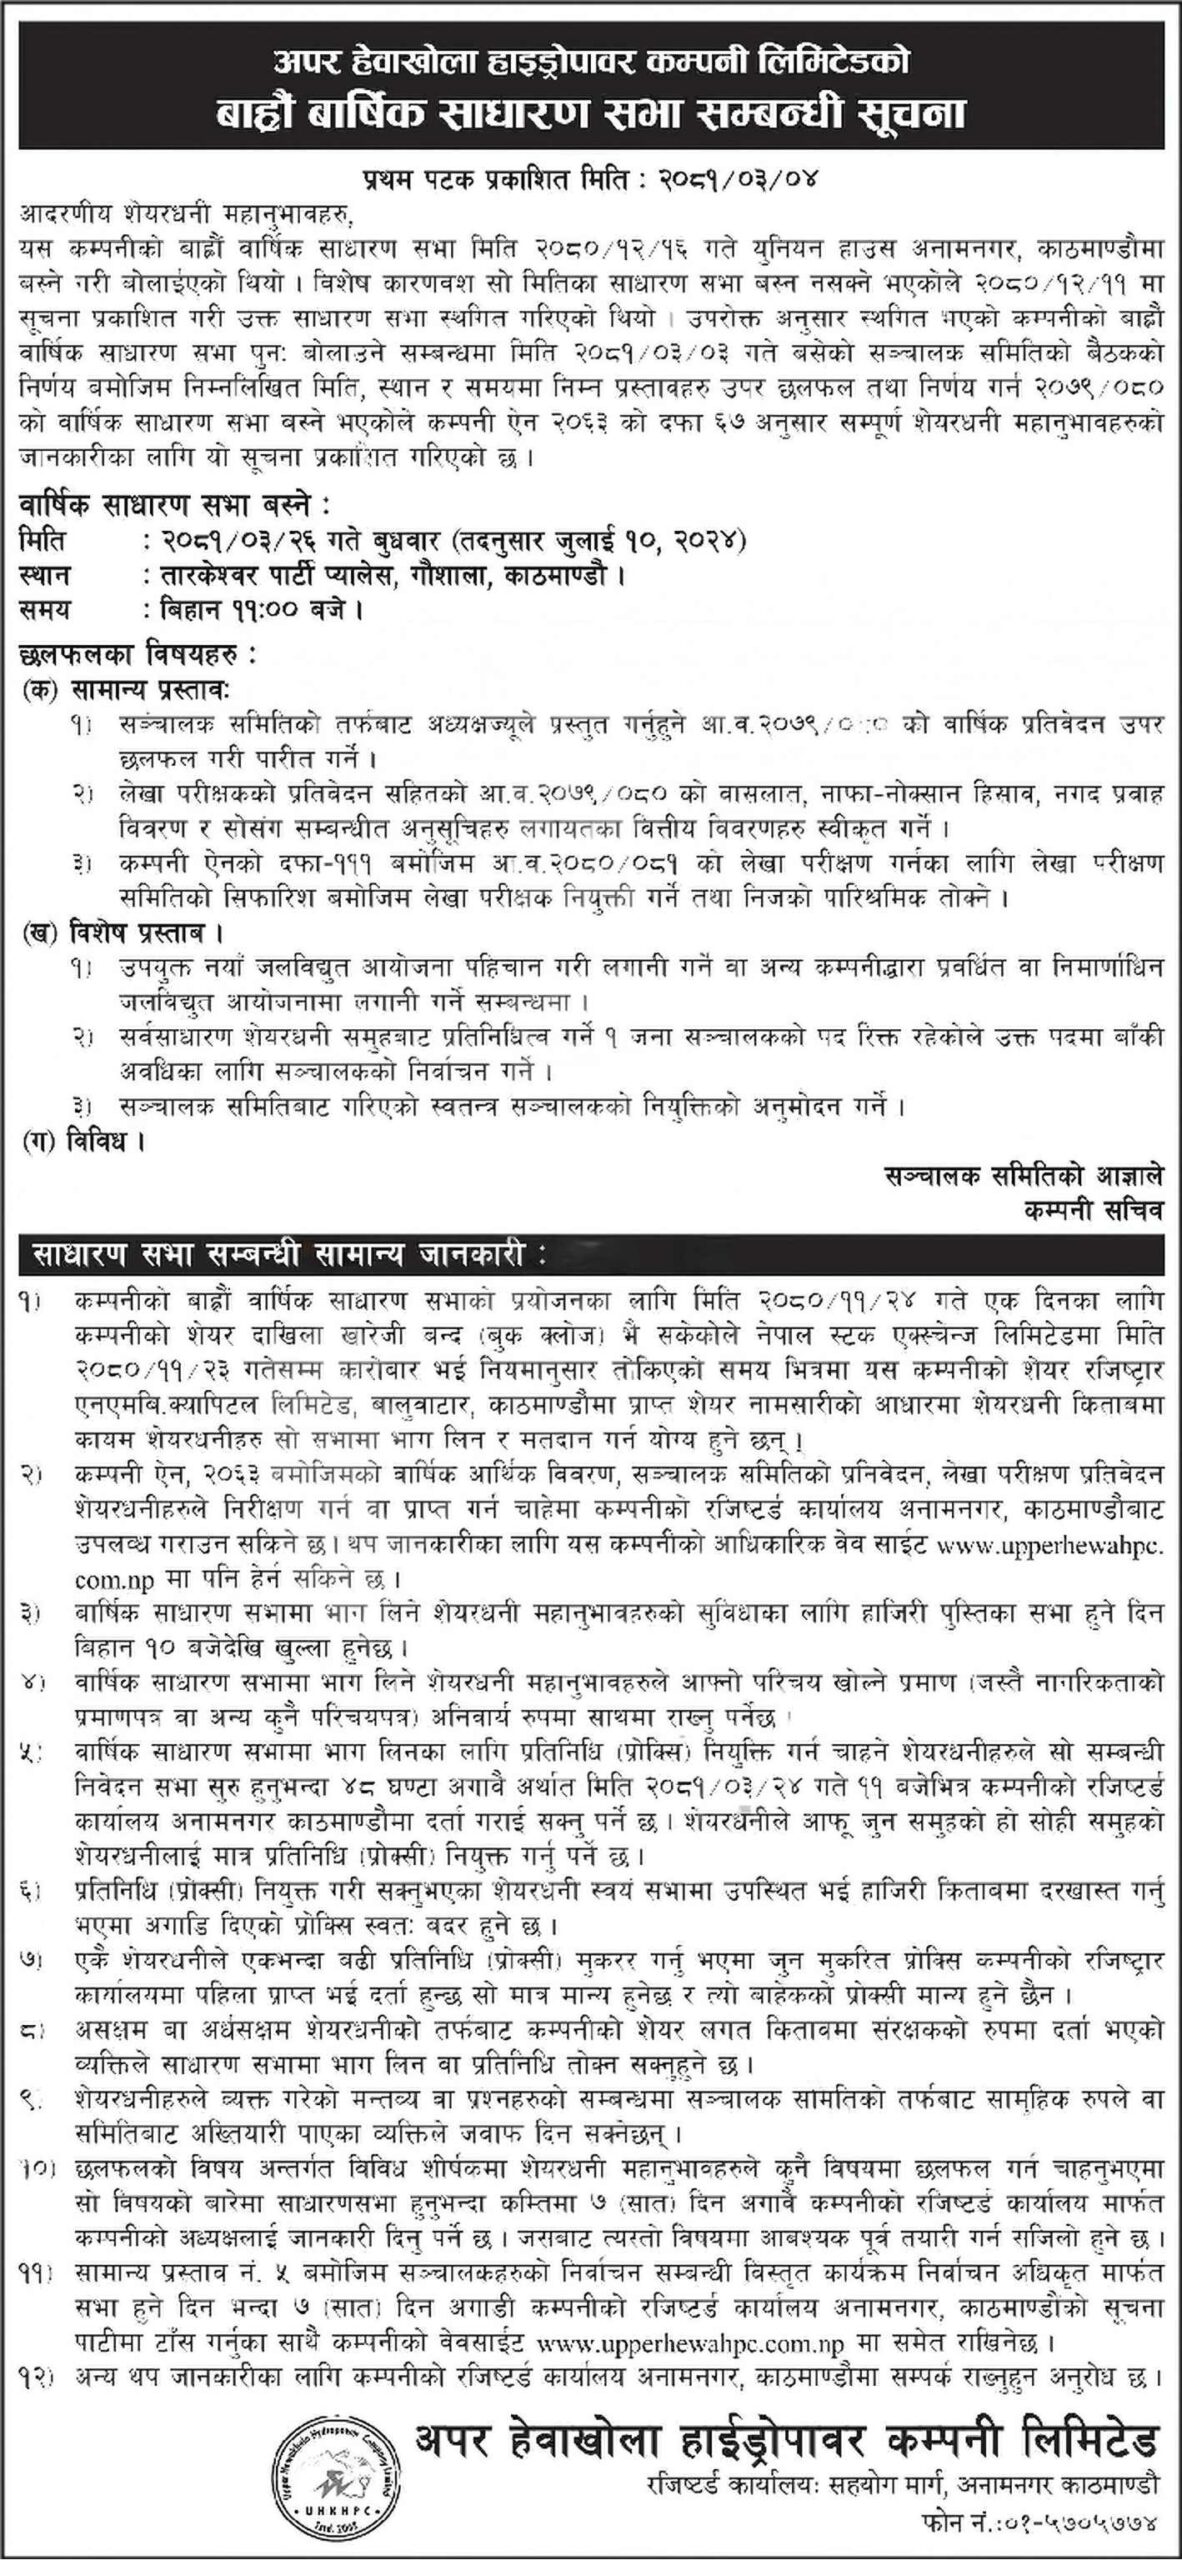 an image of notice of Upper Hewakhola Hydropower Reschedules 12th AGM to 26th Ashadh 2081